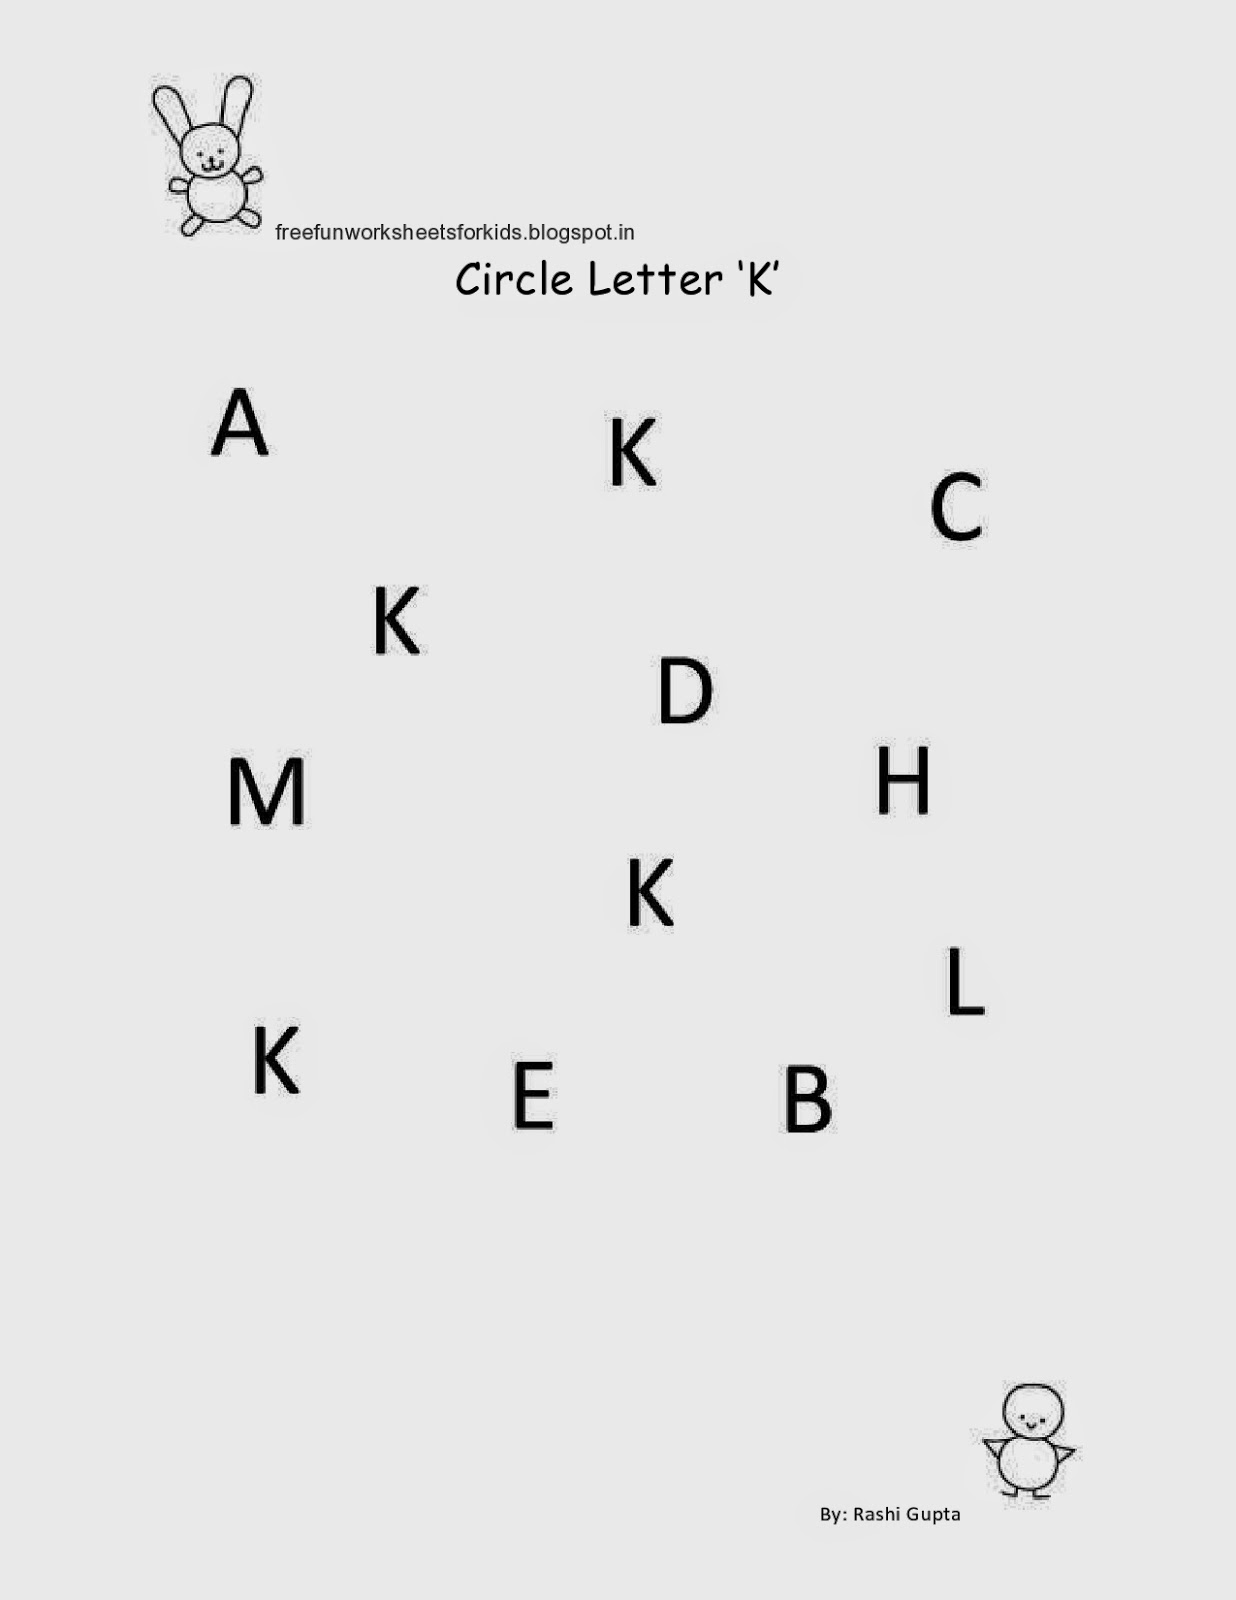 17-best-images-of-circle-the-letter-s-worksheet-circle-letter-i-worksheet-letter-j-printable